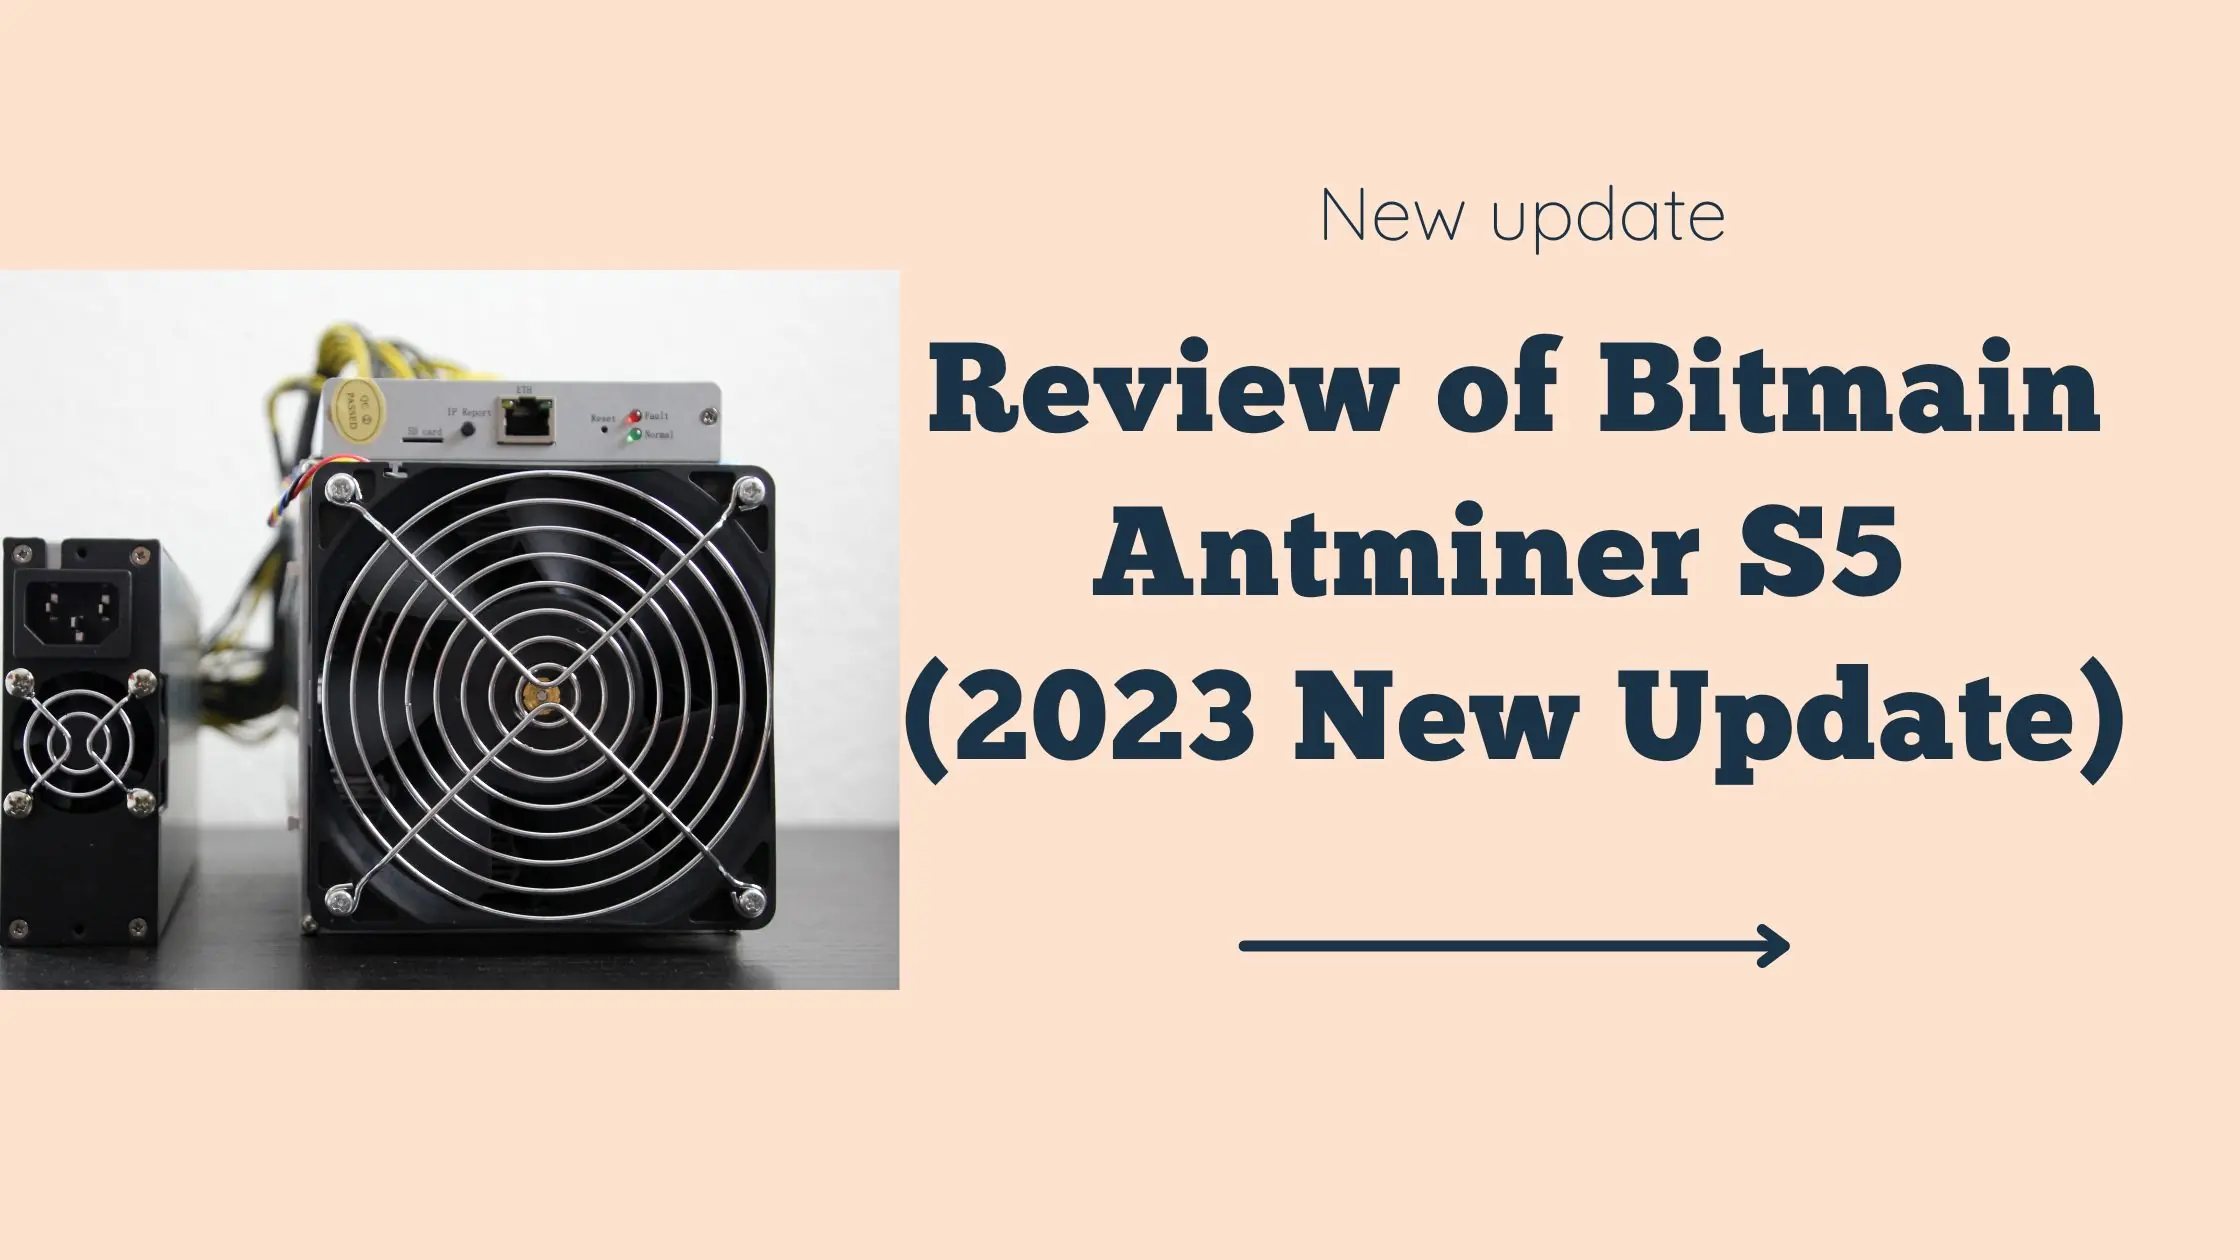 Review of Bitmain Antminer S5 (2023 New Update)